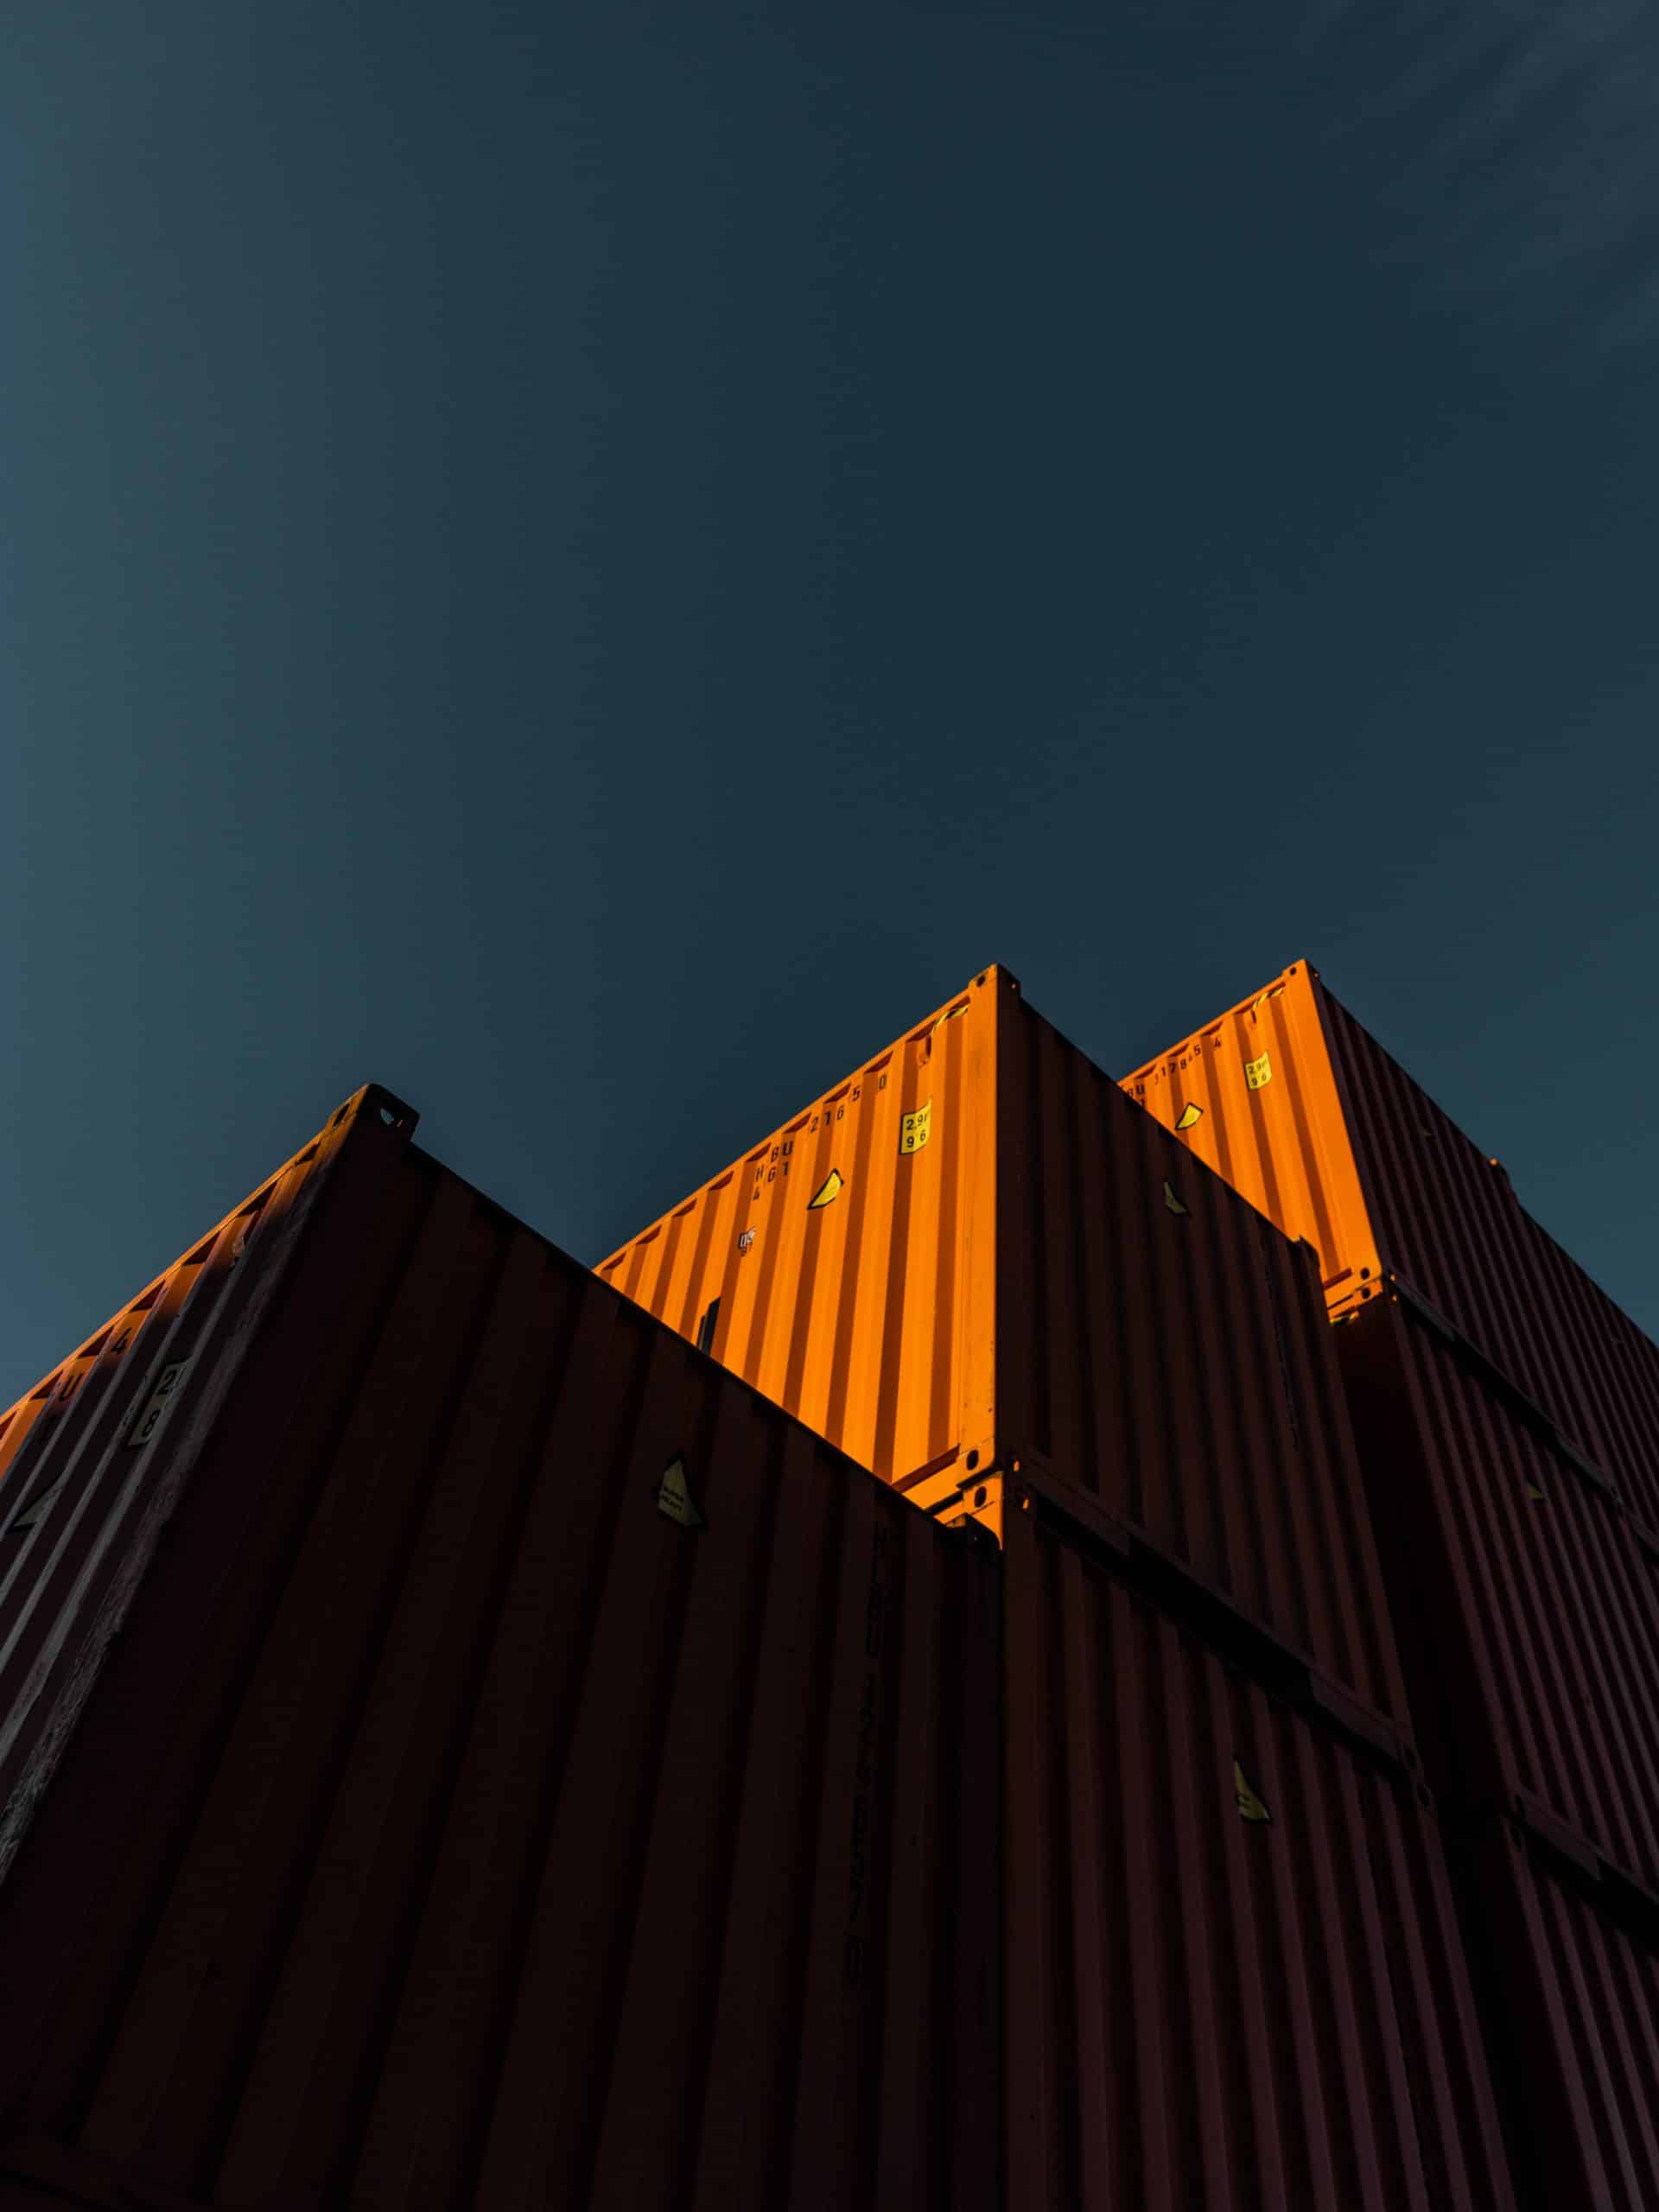 Orange containers stacked in the evening.